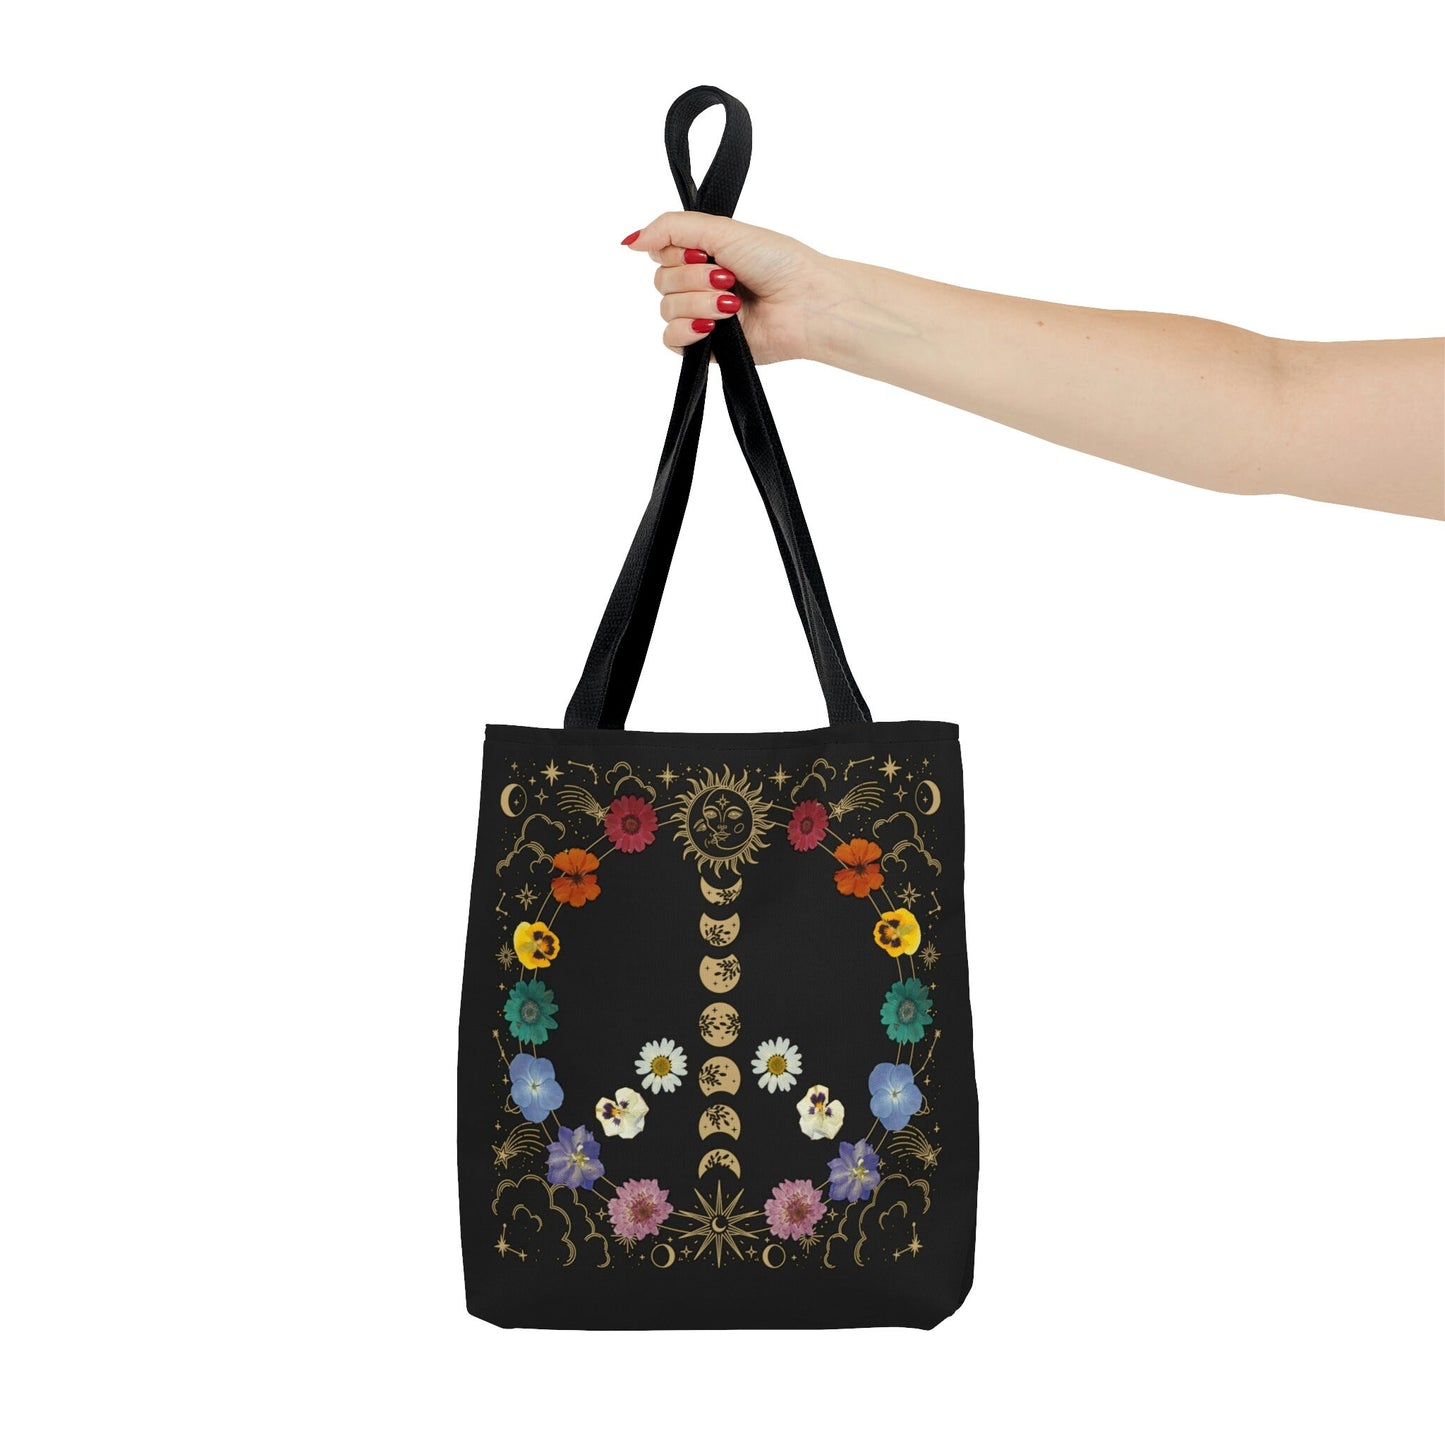 Pressed Flower Tote Bag Rainbow Peace Tote Bag Mystical Sun and Moon Tote Floral Tote Wildflower Tote Bag Wild Flower Whimsigoth Tote Bag